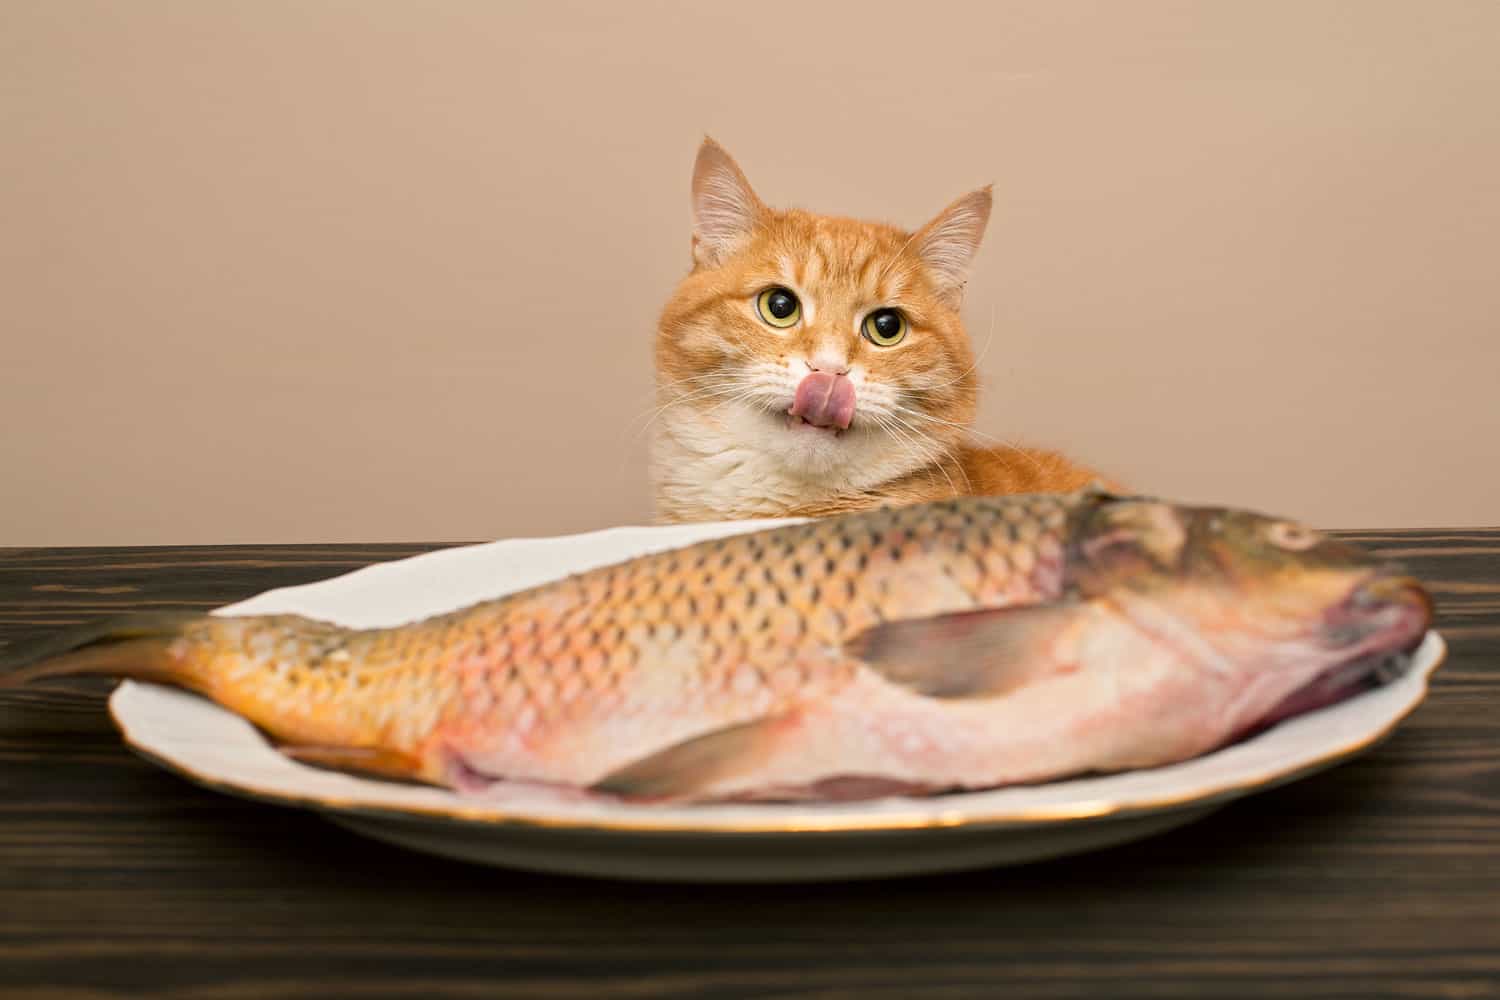 Red cat wants to steal a big fish from a white plate on a wooden table
